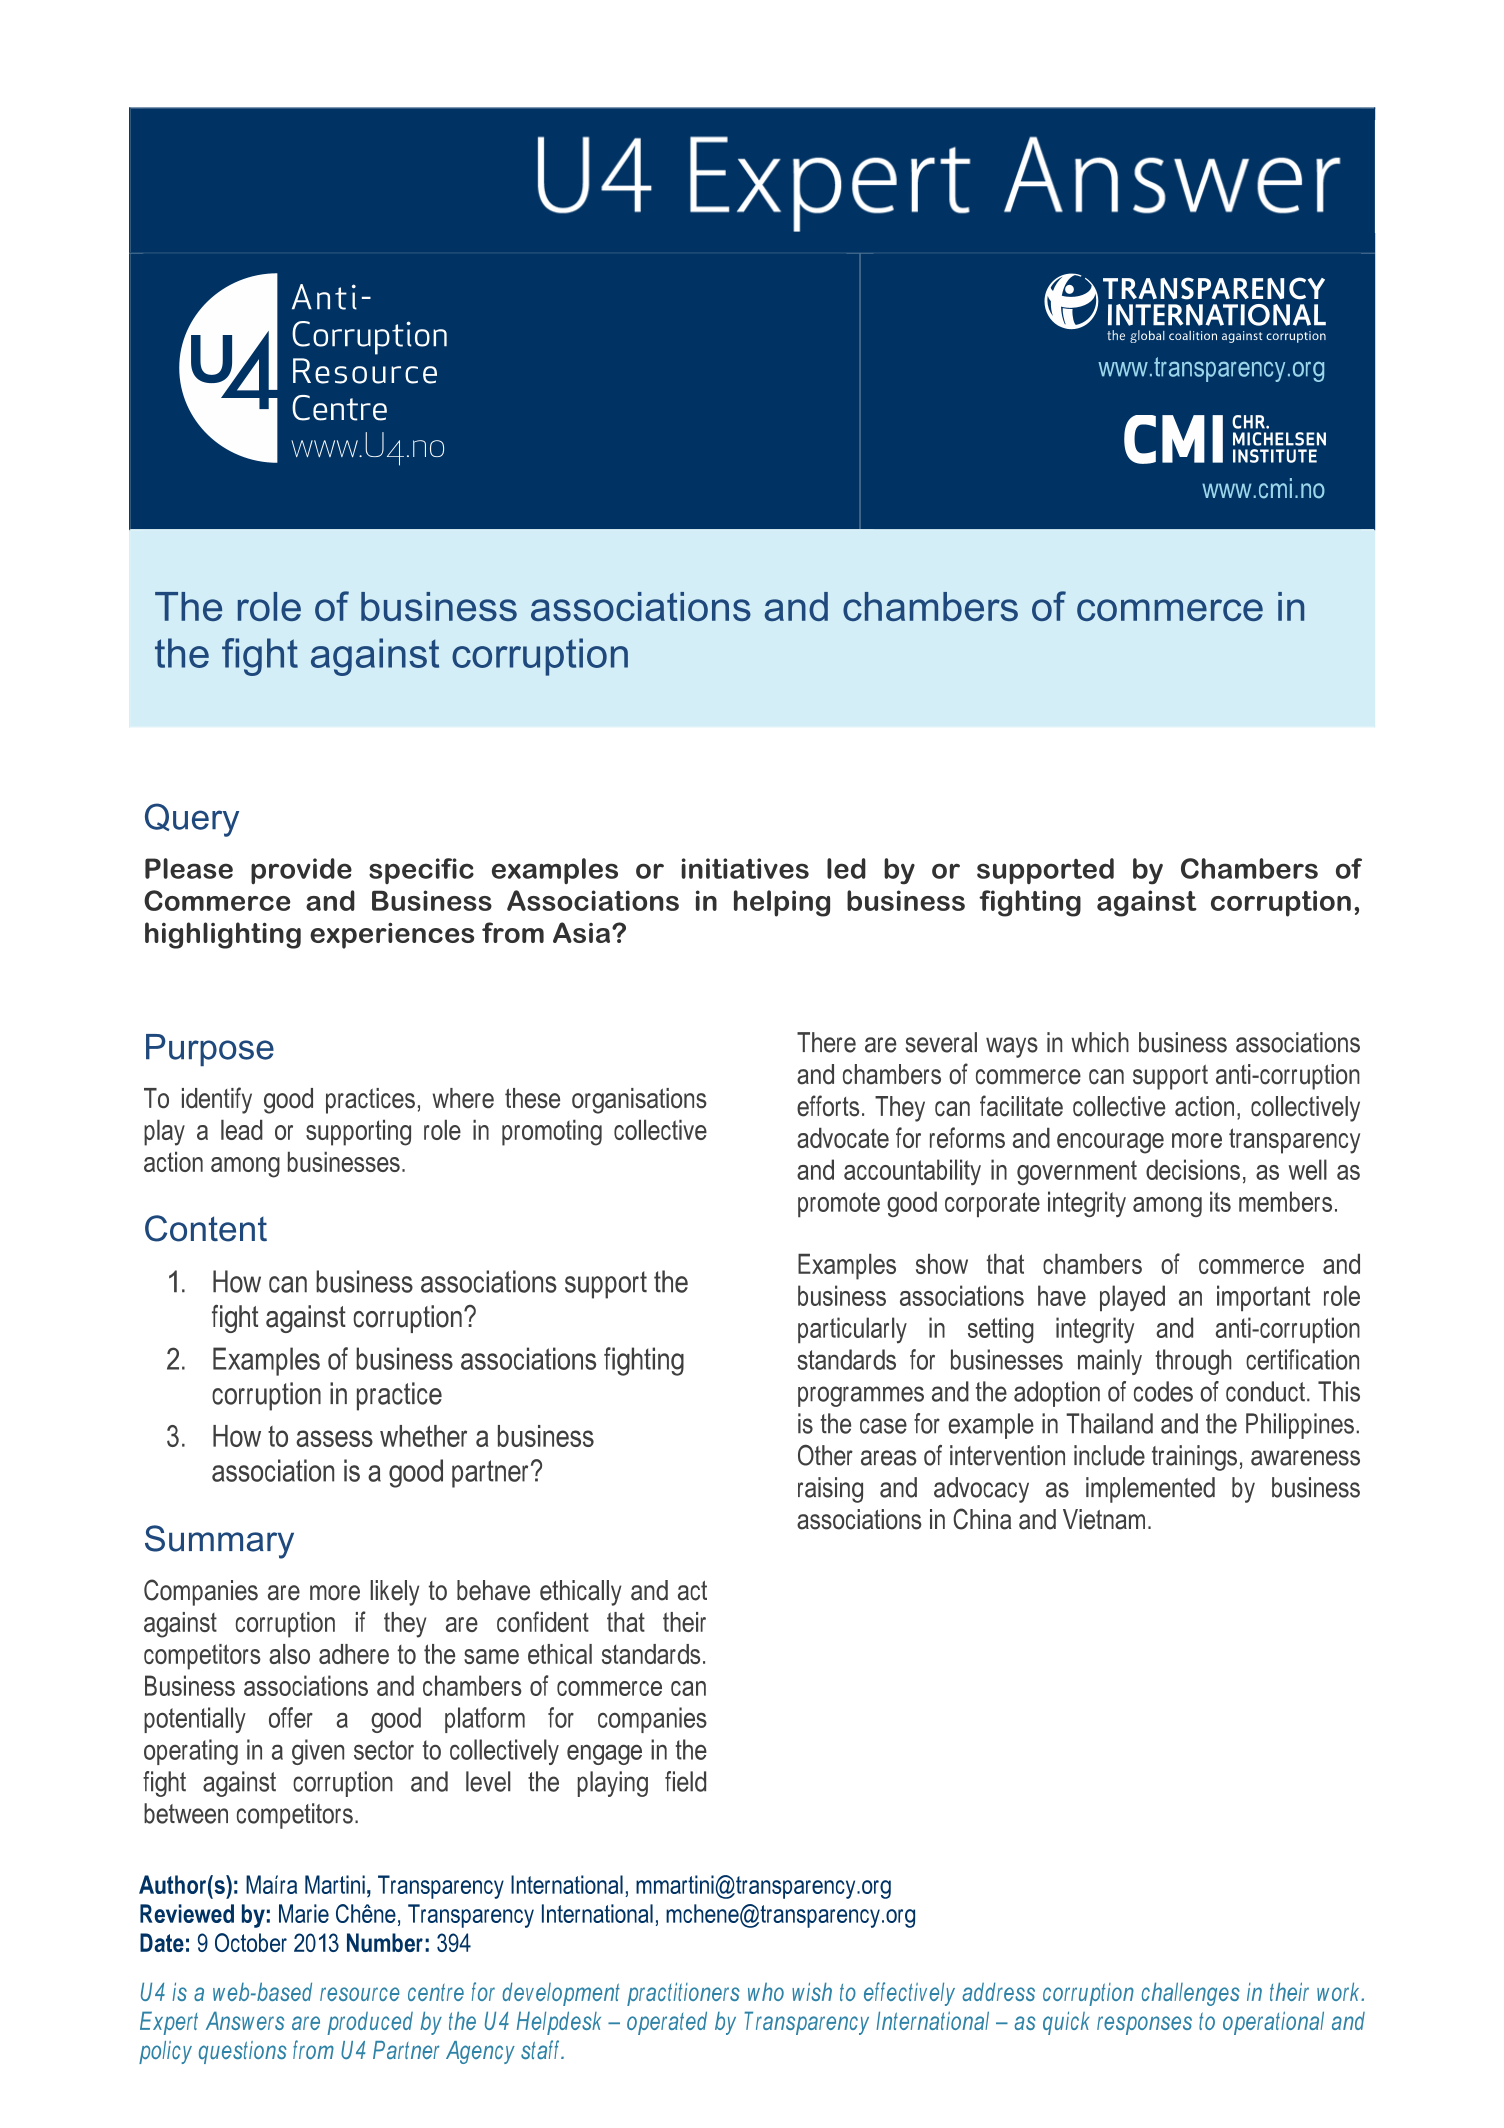 The role of business associations and chambers of commerce in the fight against corruption